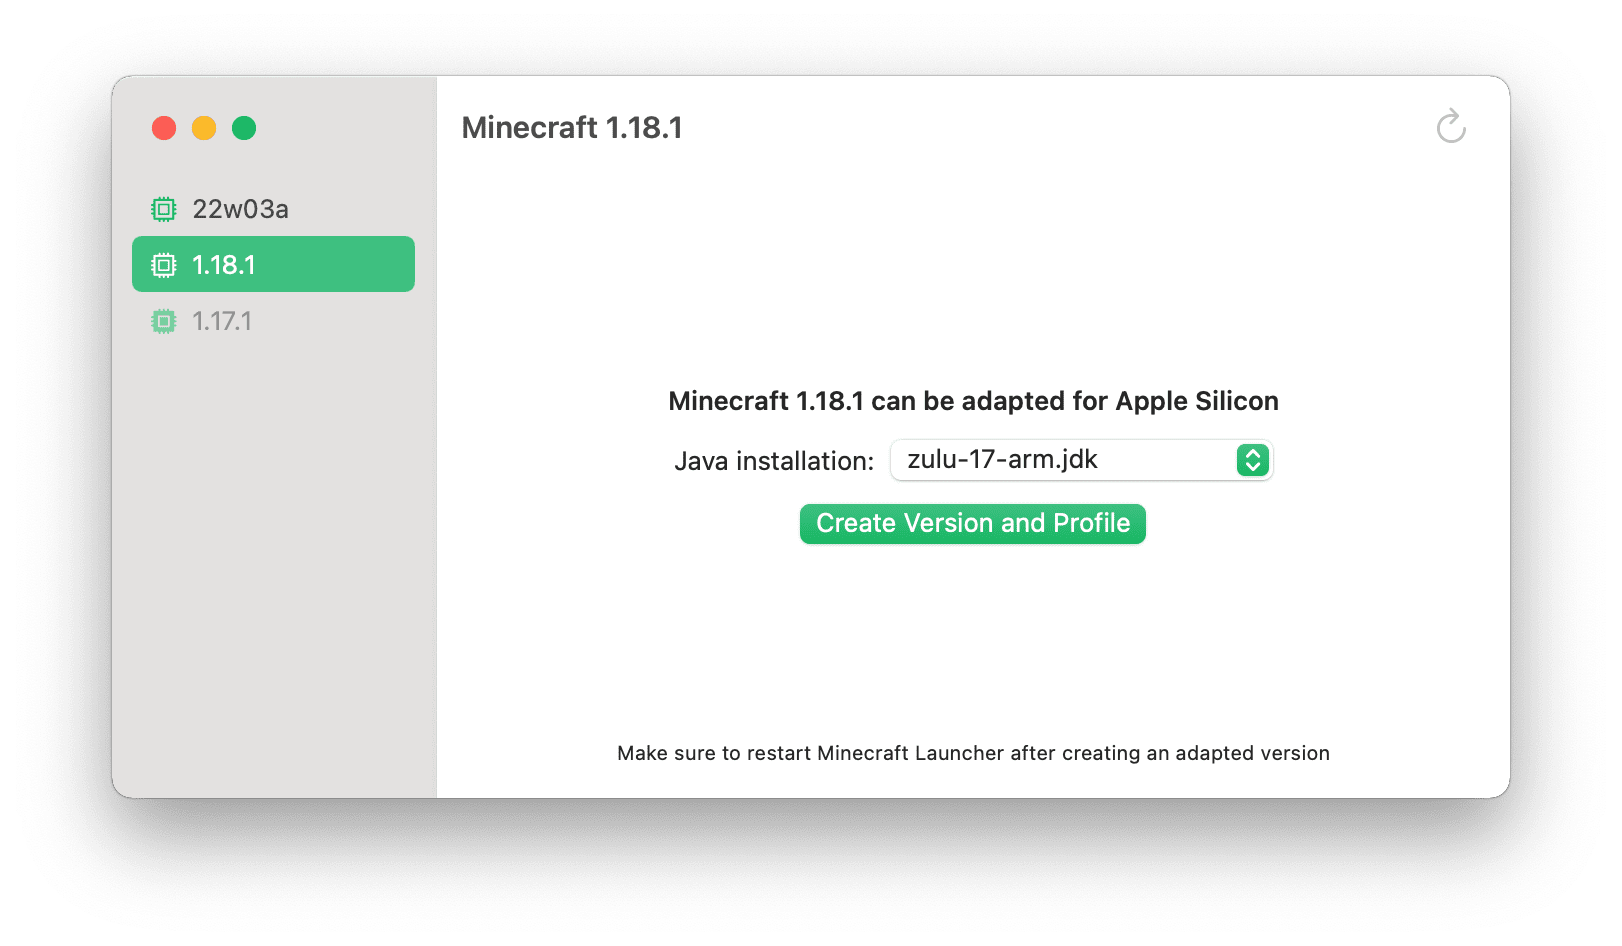 A screenshot of Minecraft Silicon prompting the user to adapt Minecraft 1.18.1